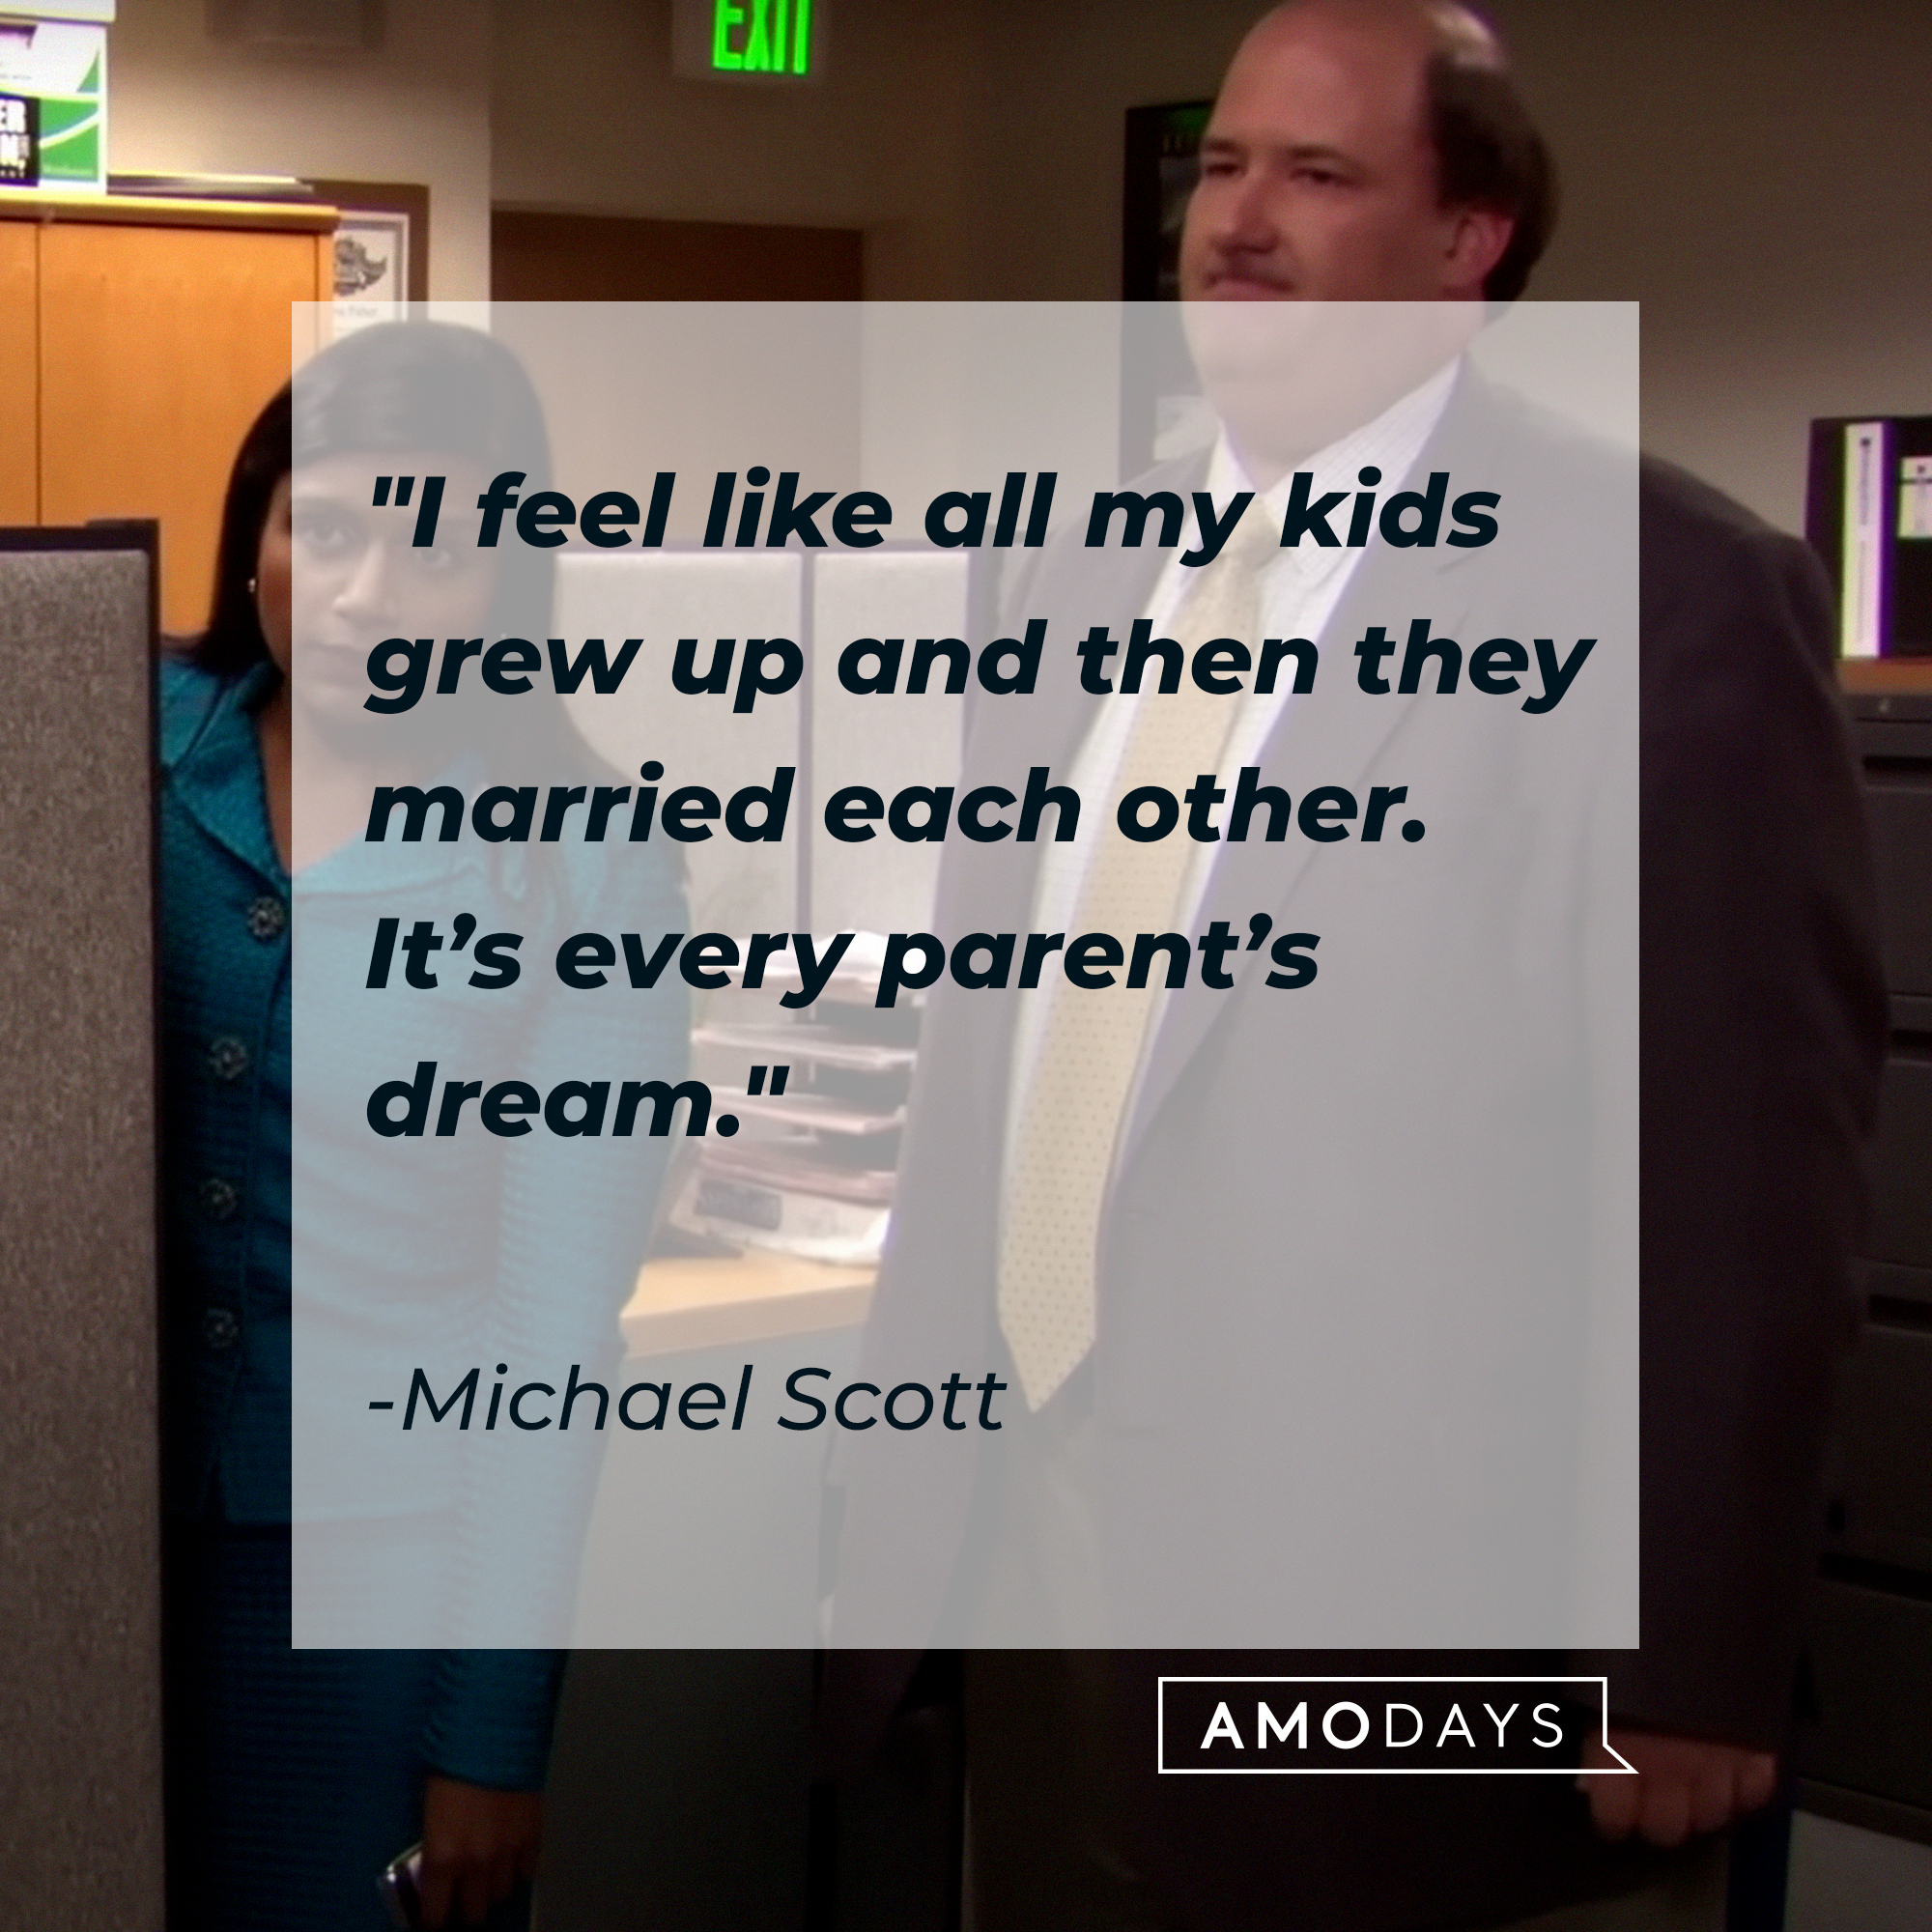 Michael Scott's quote: "I feel like all my kids grew up and then they married each other. It's every parent's dream" | Source: Youtube.com/TheOffice